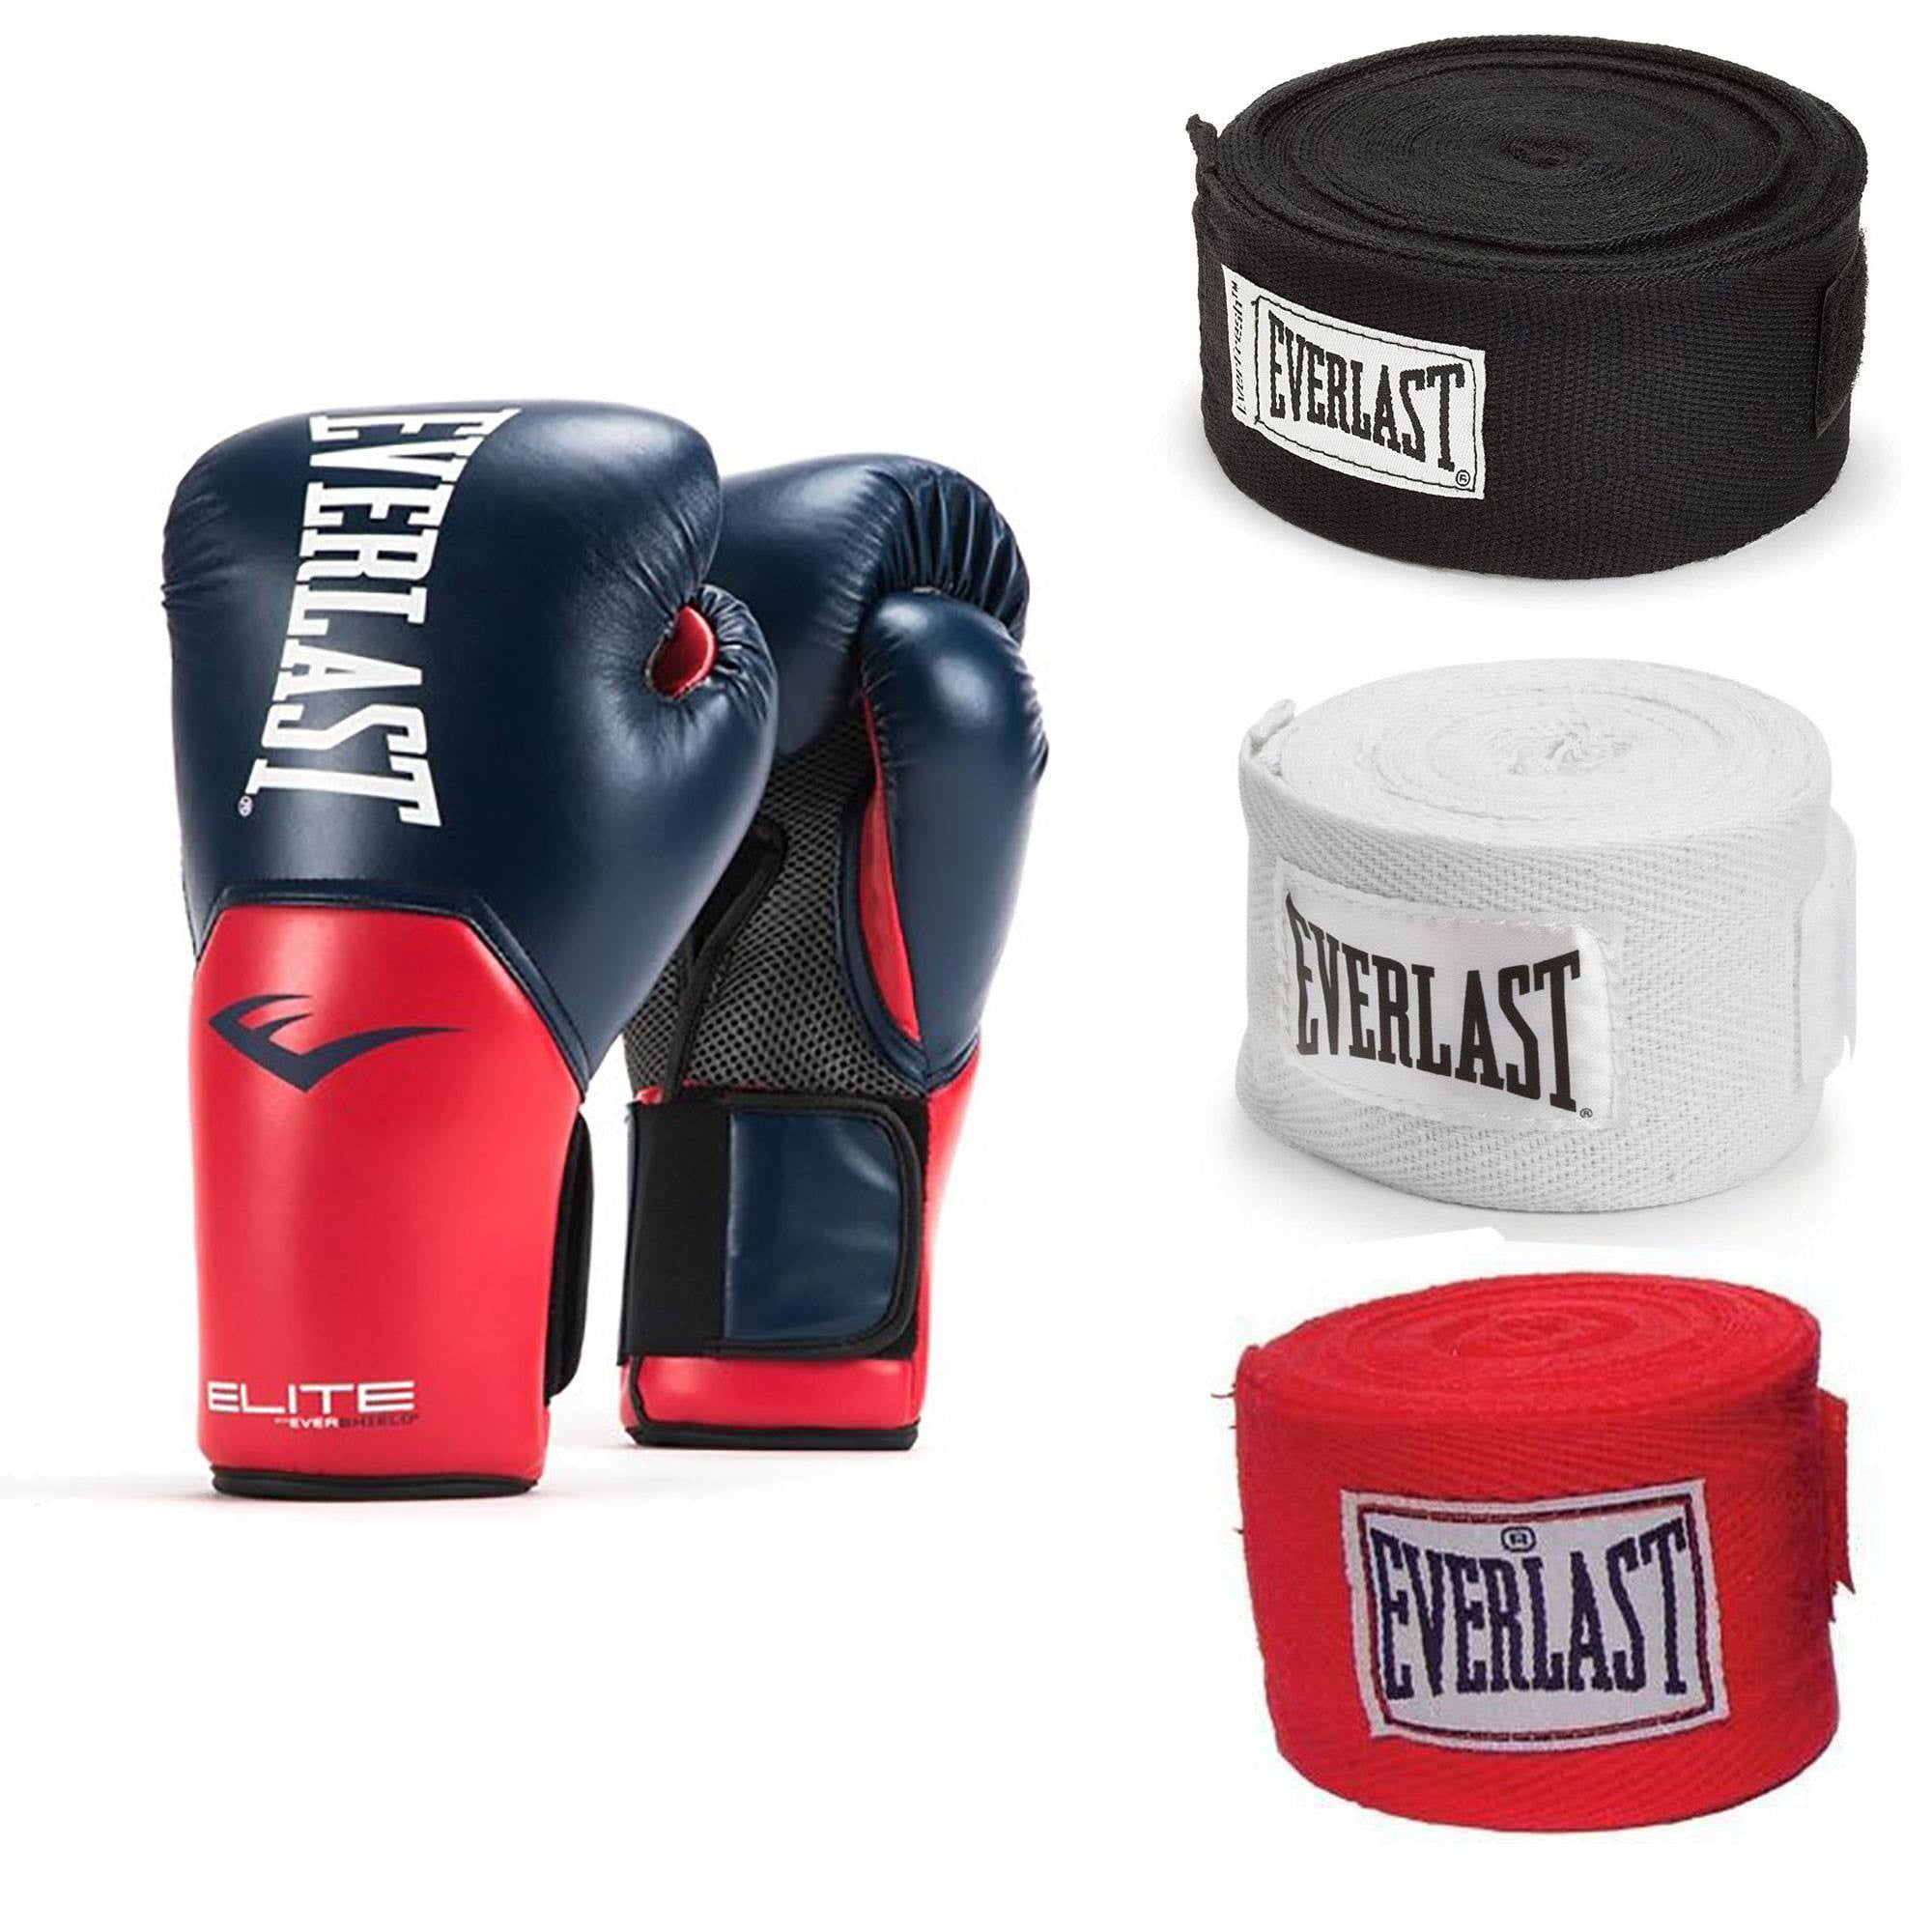 Everlast 4455-3 Professional Boxing Hand Wraps for sale online 